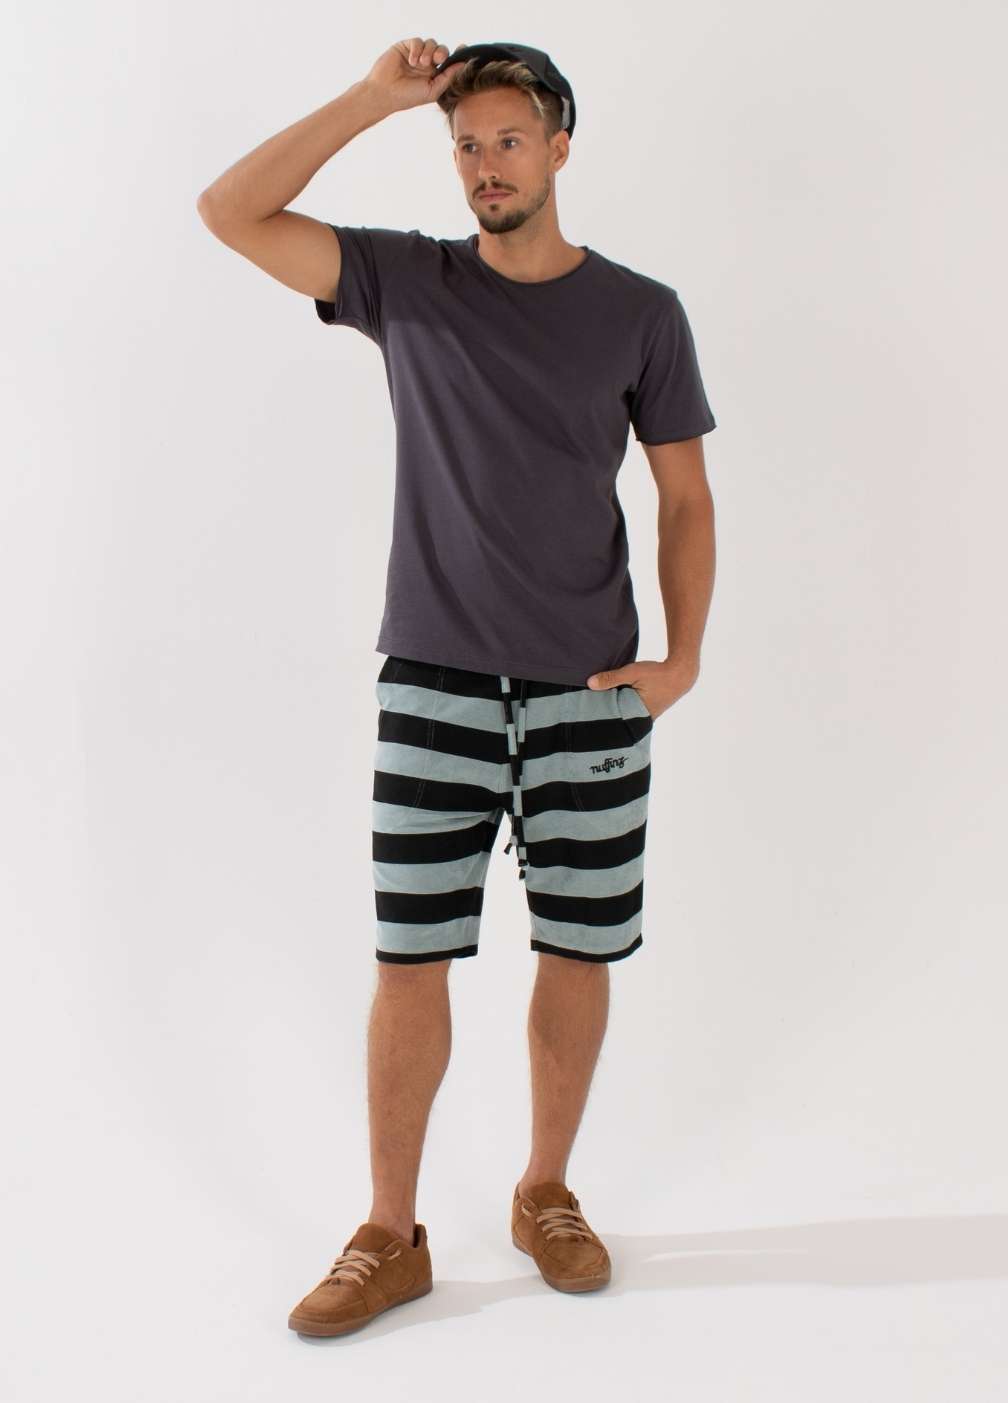 nuffinz SILVER BLUE TOWEL SHORTS ST - whole outfit visible from the front - made out of organic terry cloth - sustainable men's shorts - silver blue striped